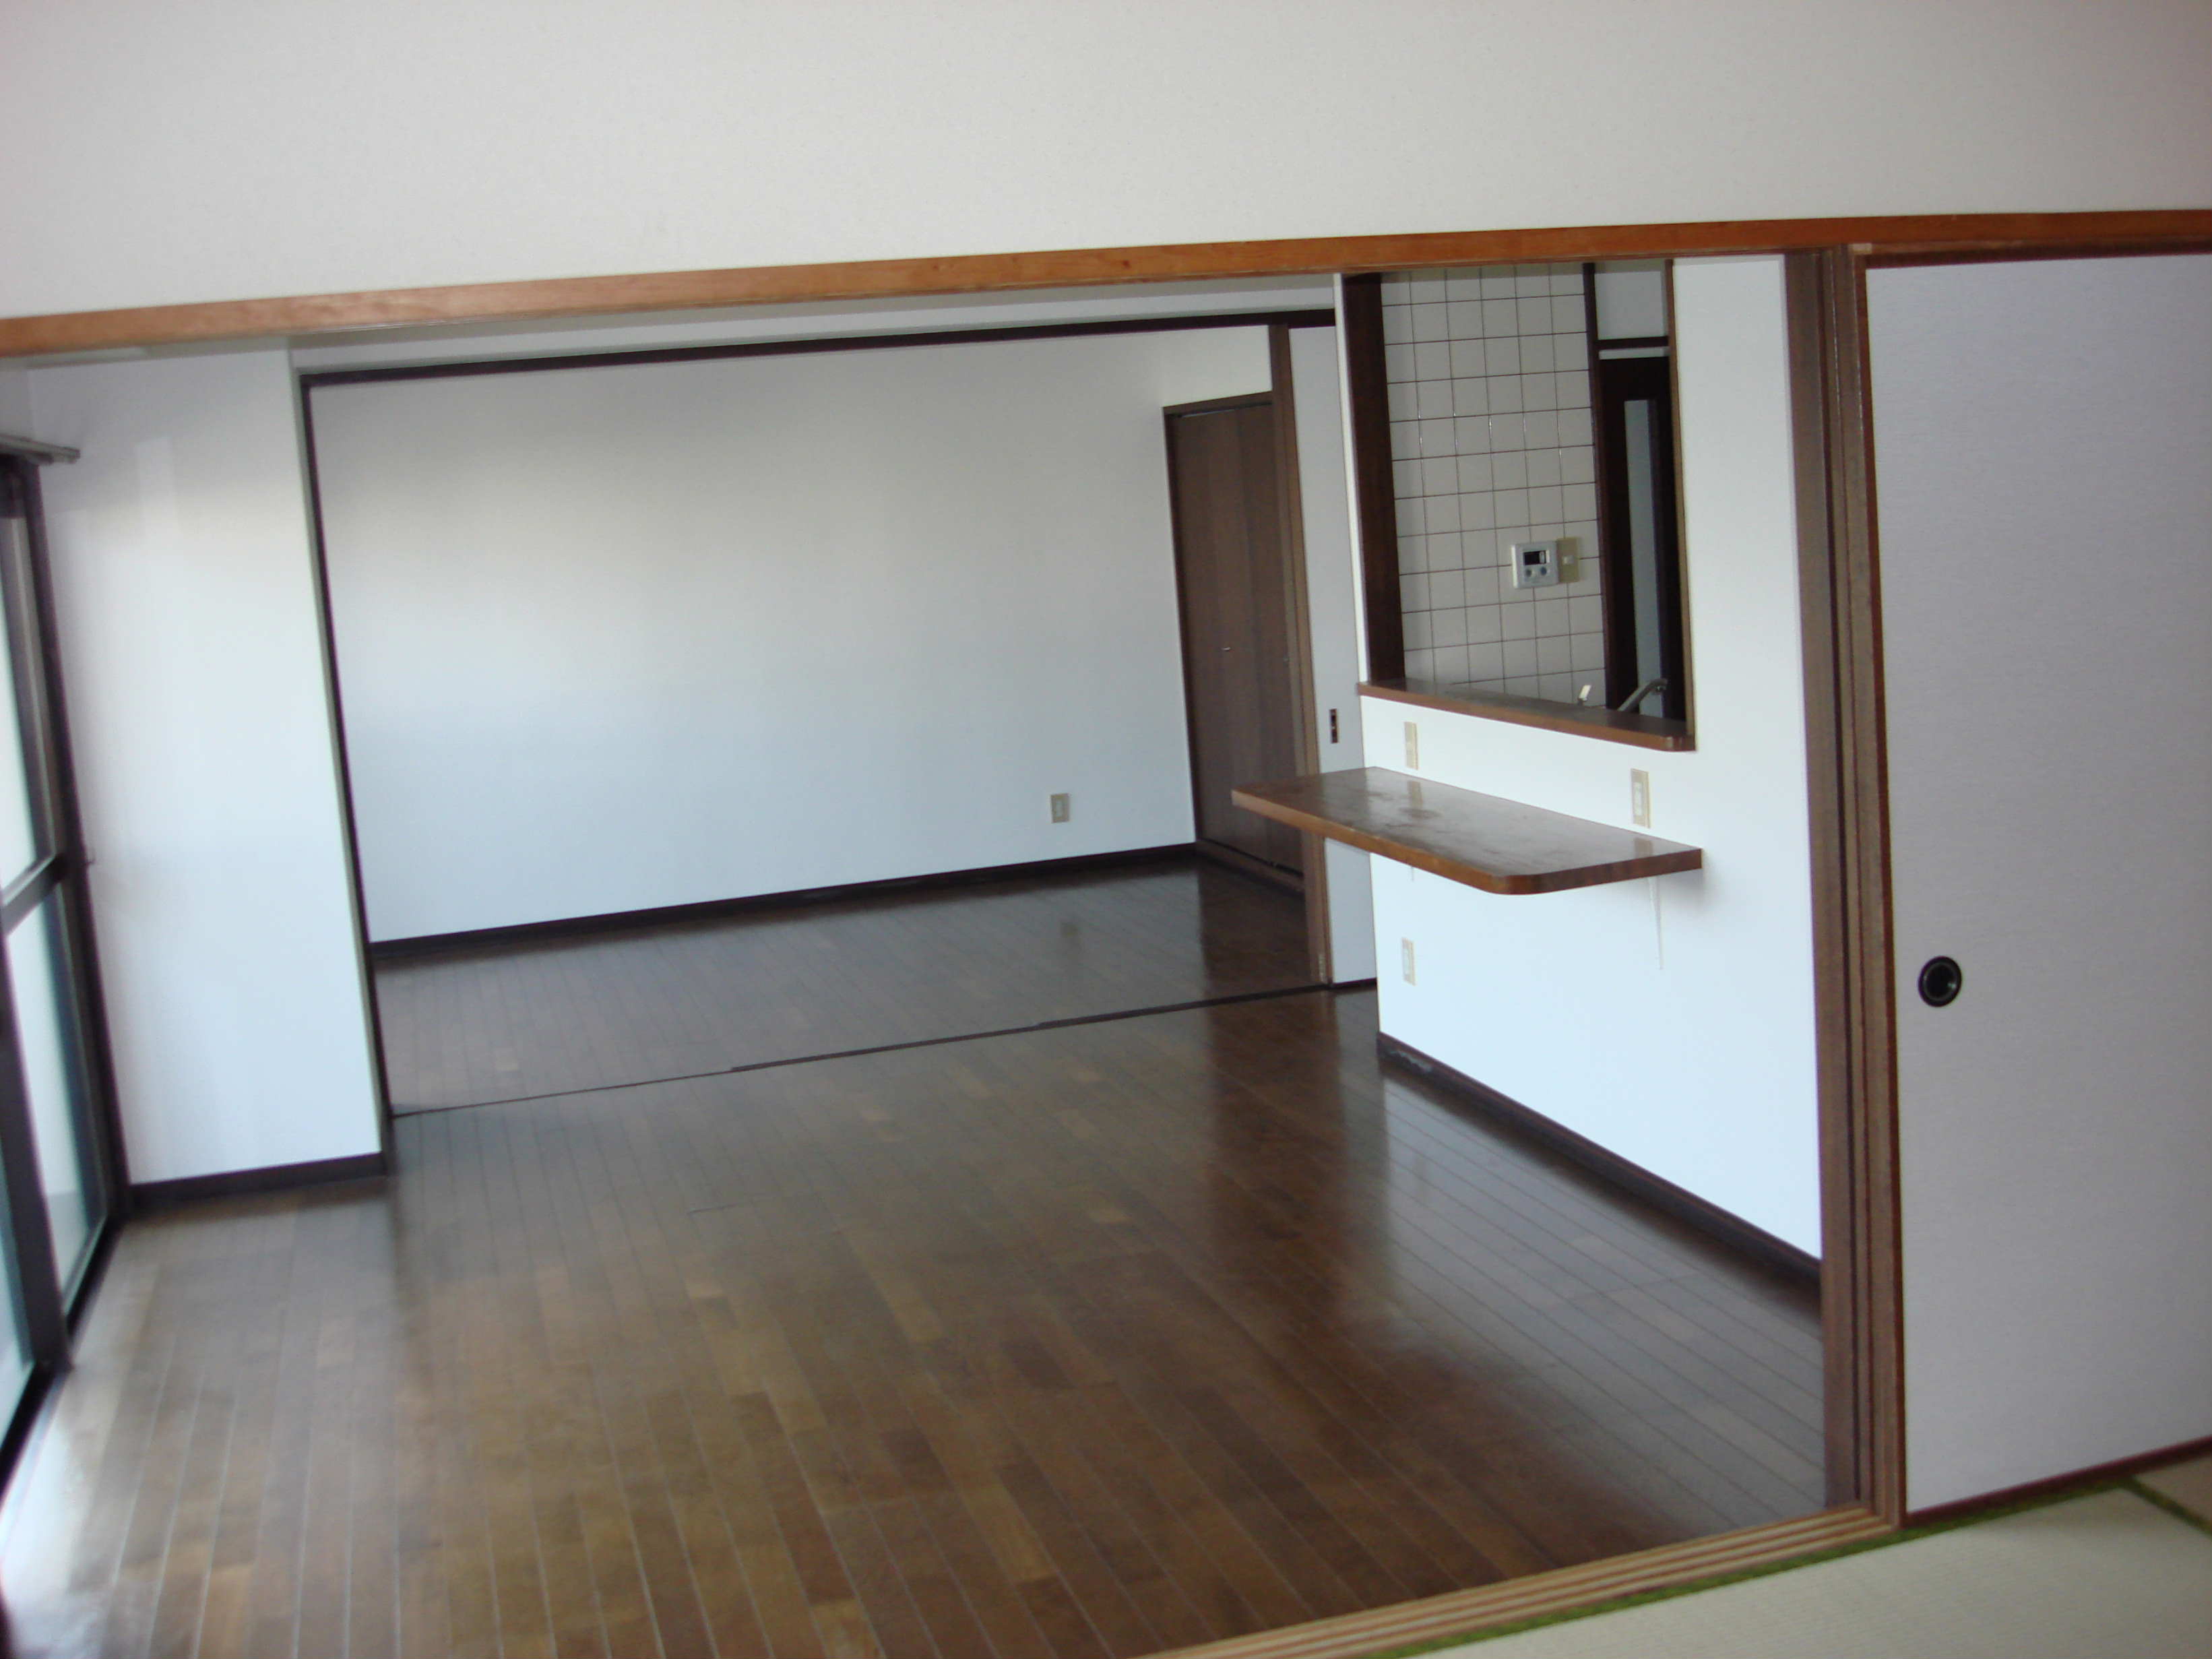 Living and room. You can use To spacious you open the partition!